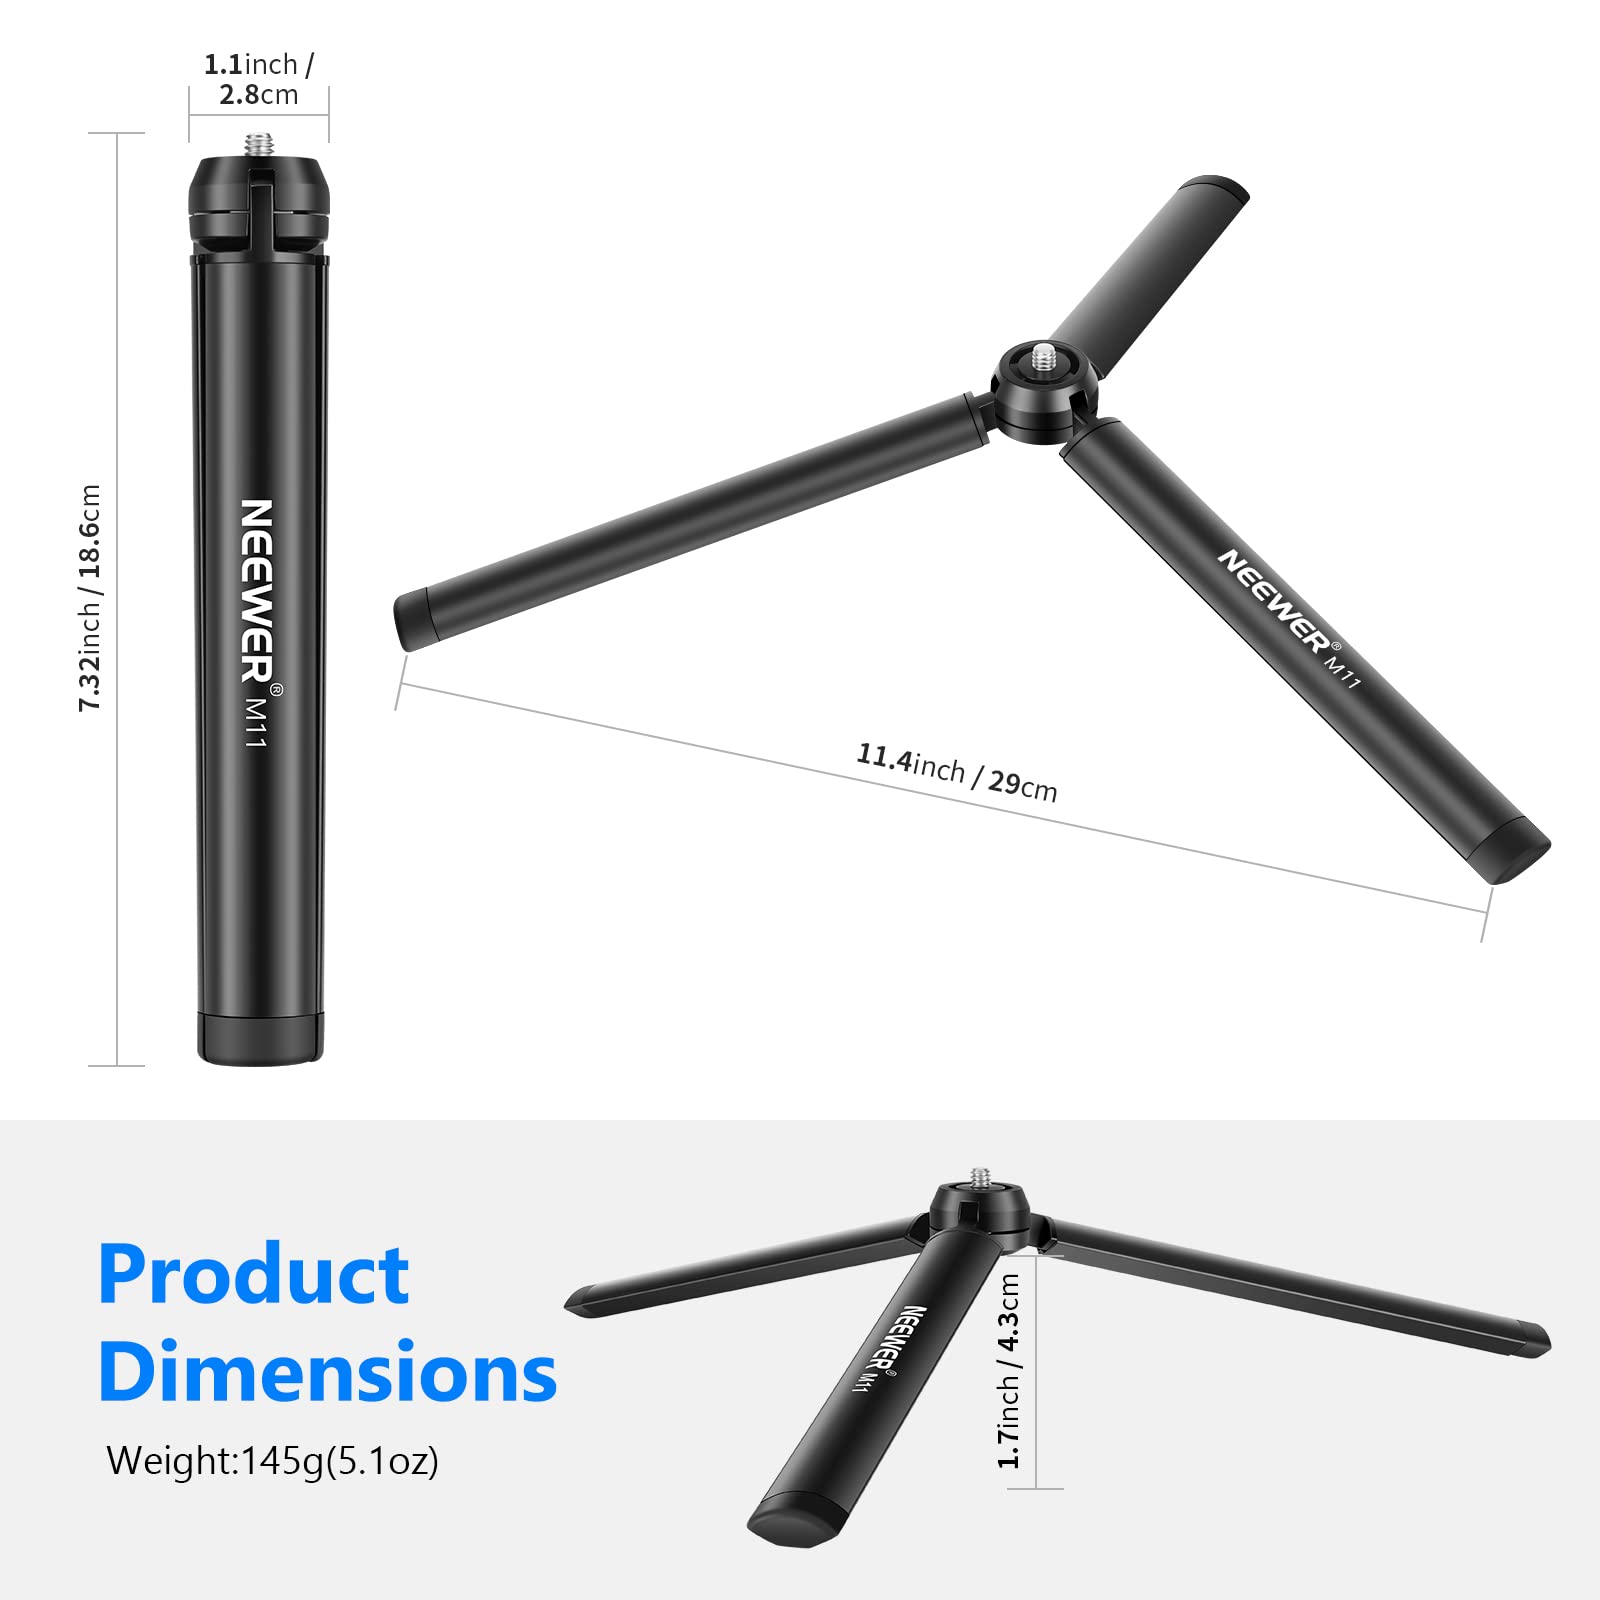 NEEWER Mini Metal Tripod, Table Stand, Desktop Compact Tripod Compatible with Crane M2, Smooth Q2, Gimbal Grip Stabilizer and All Cameras